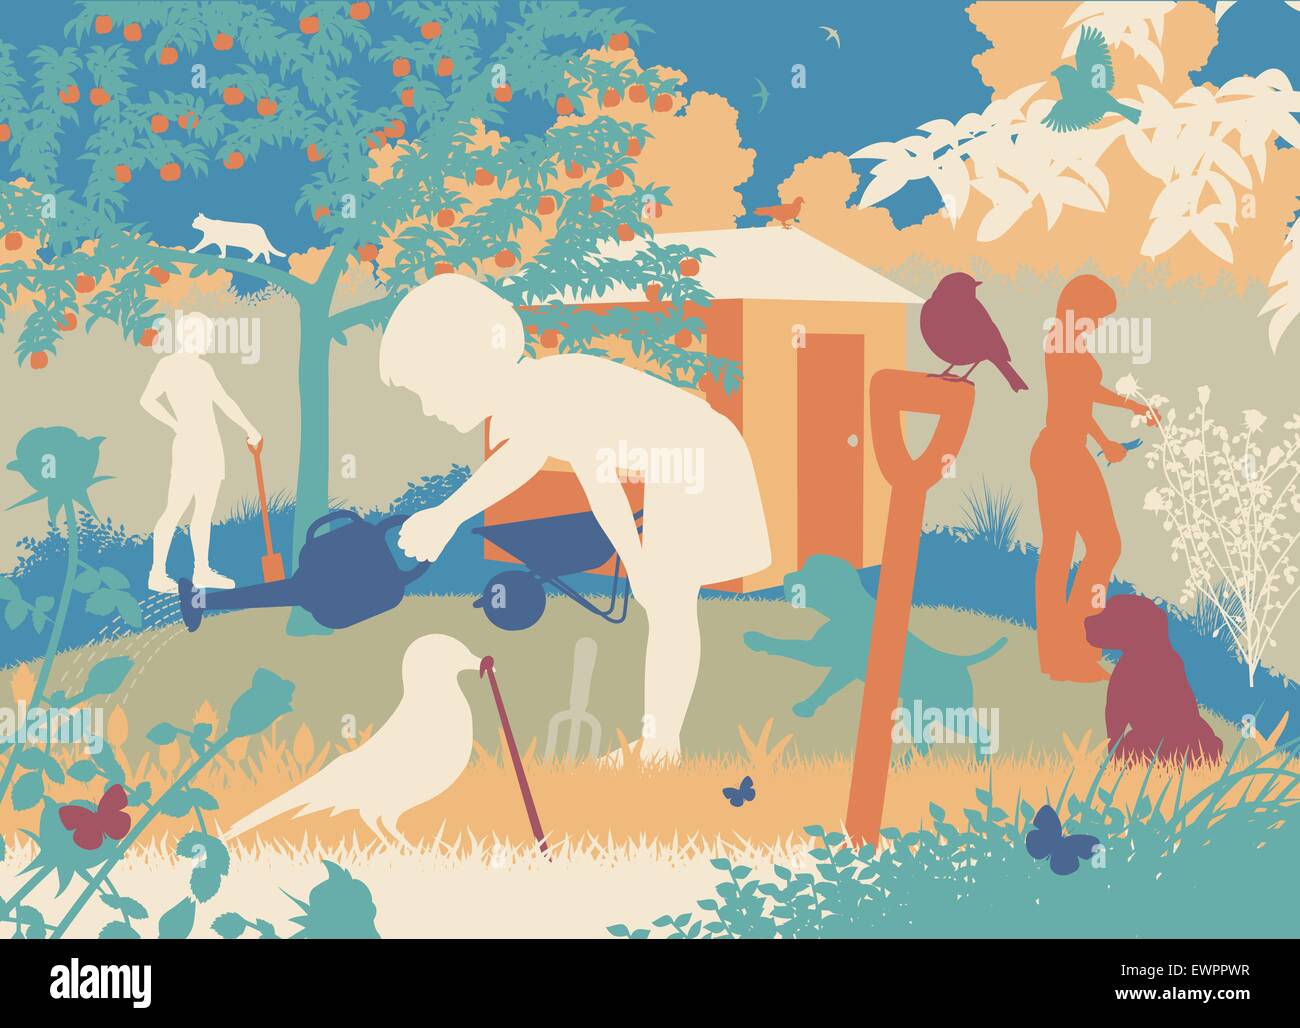 Colorful editable vector cutout illustration of a family gardening with puppies and wildlife Stock Vector